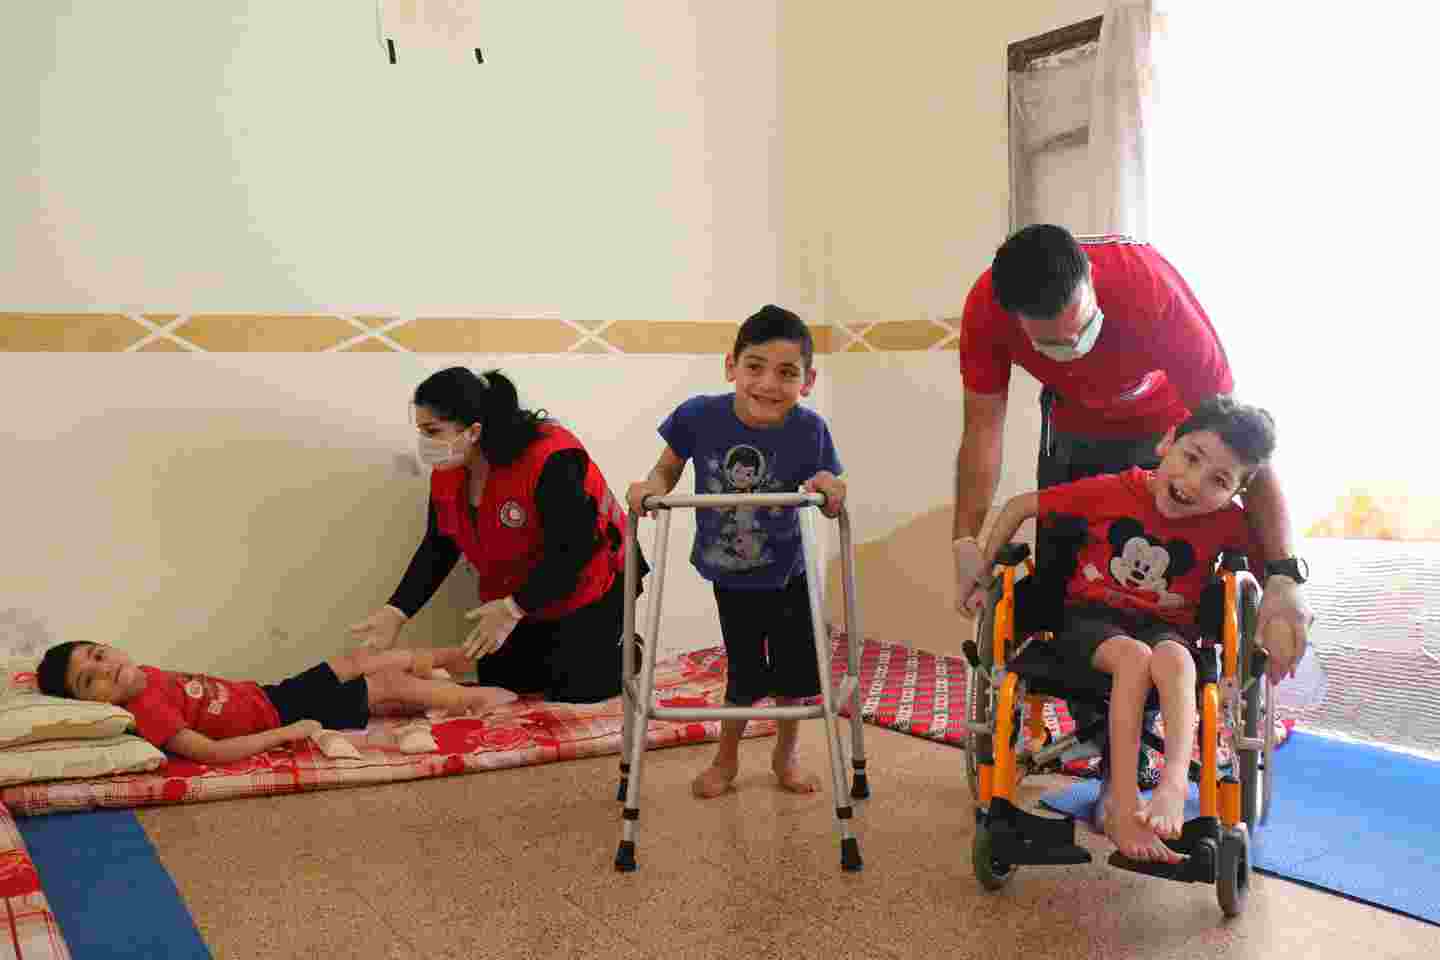 Three smiling Syrian children being helped by two Red Crescent employees.